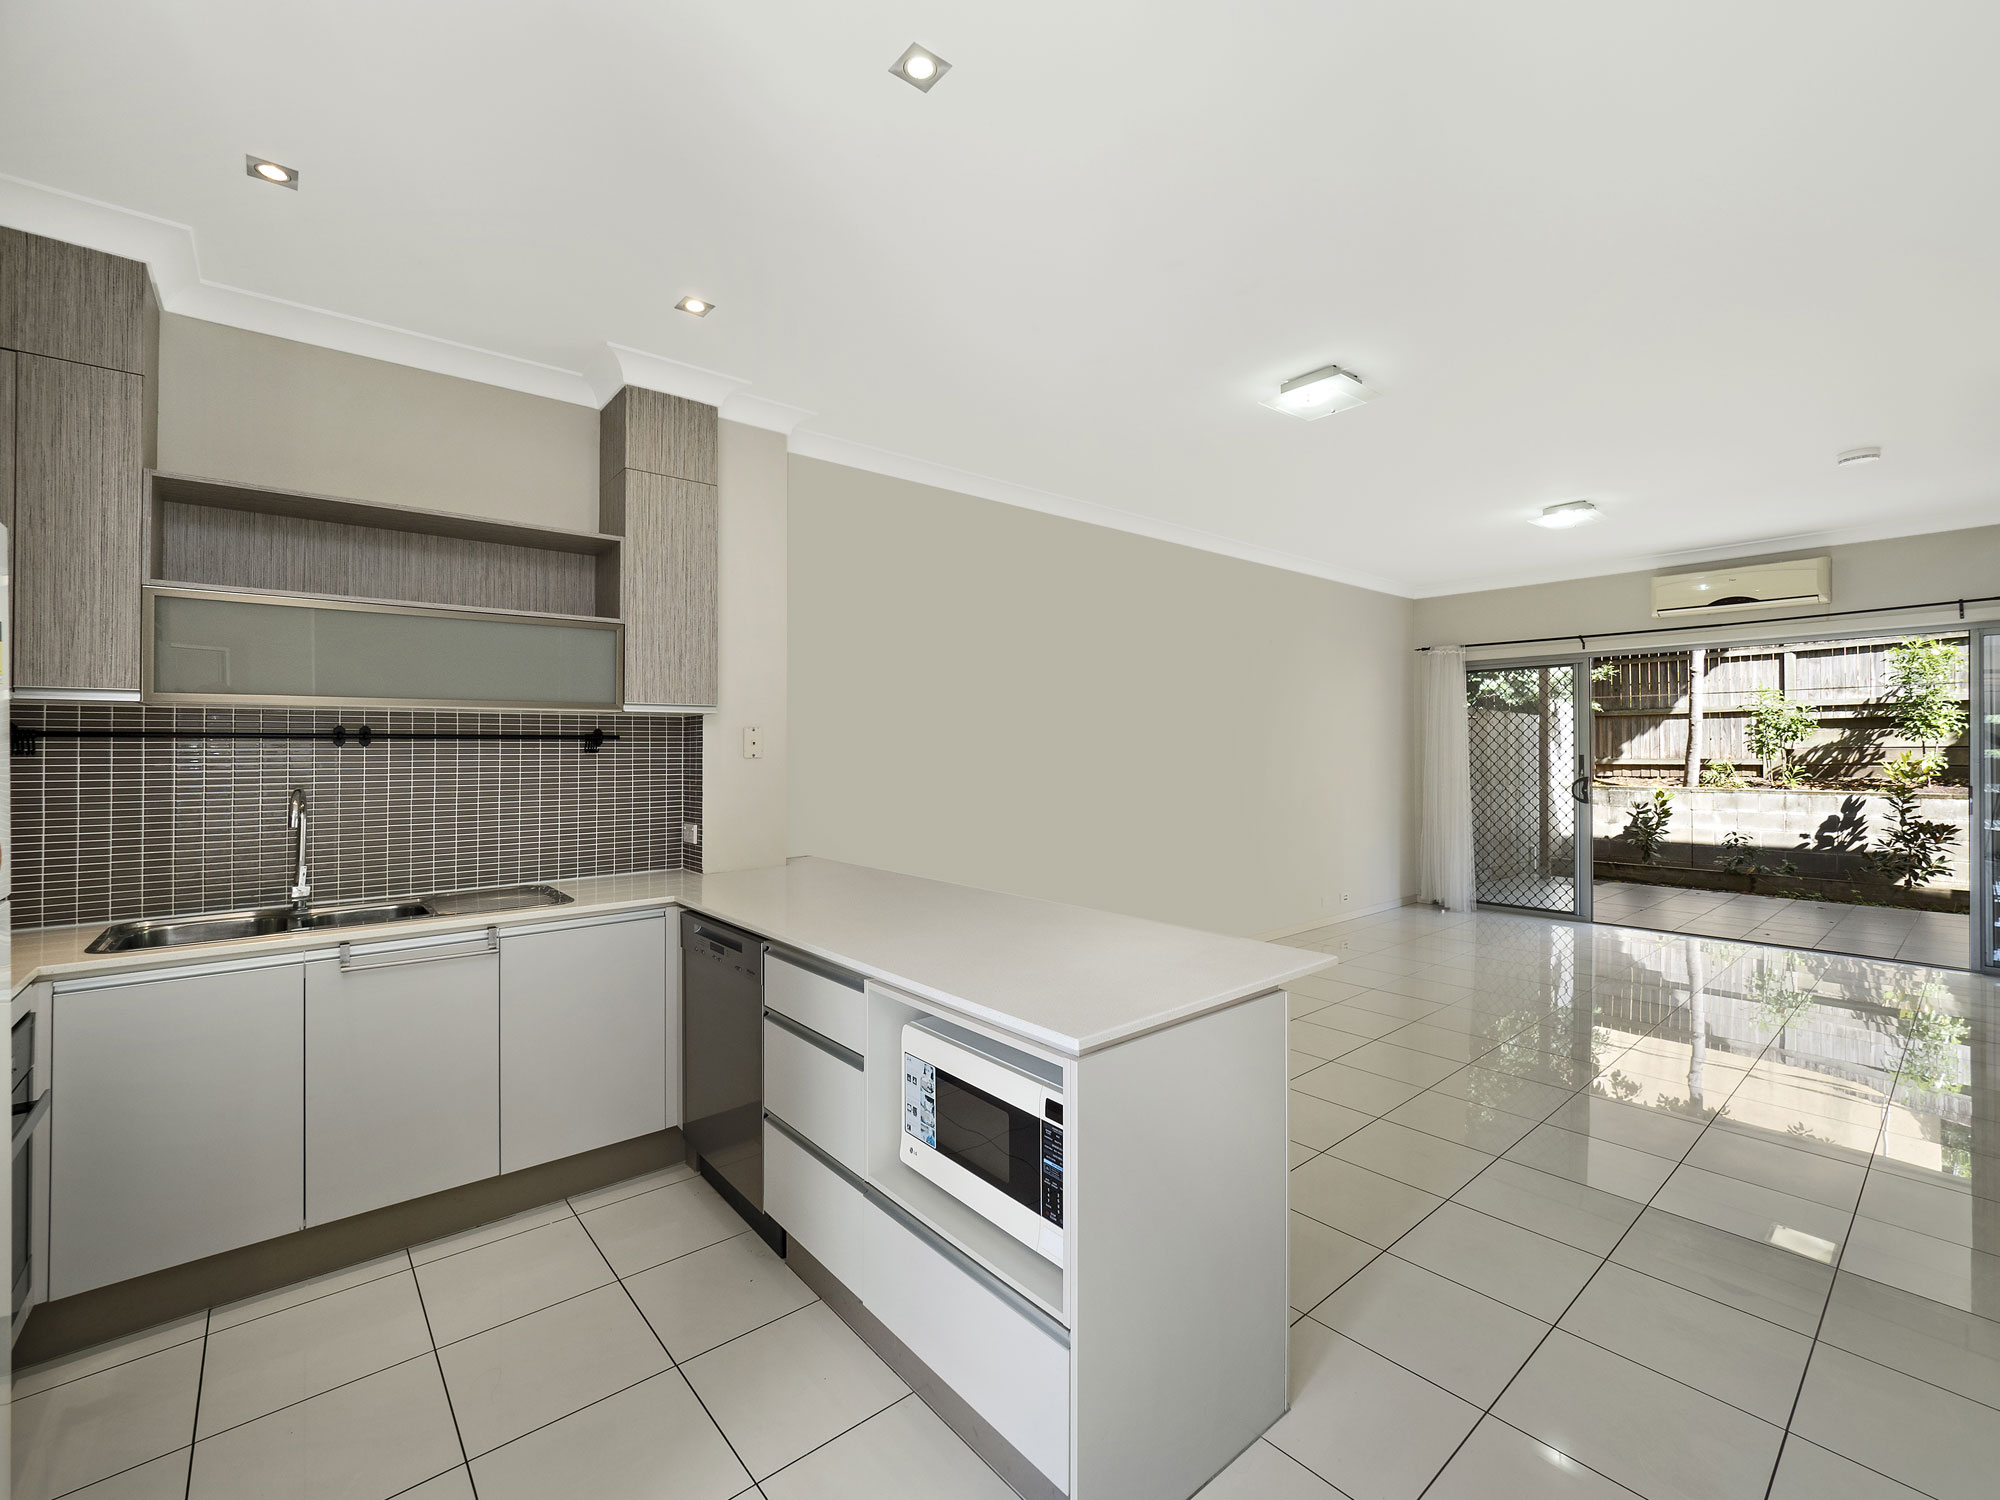 Apartment photography in Brisbane by Phil Savory